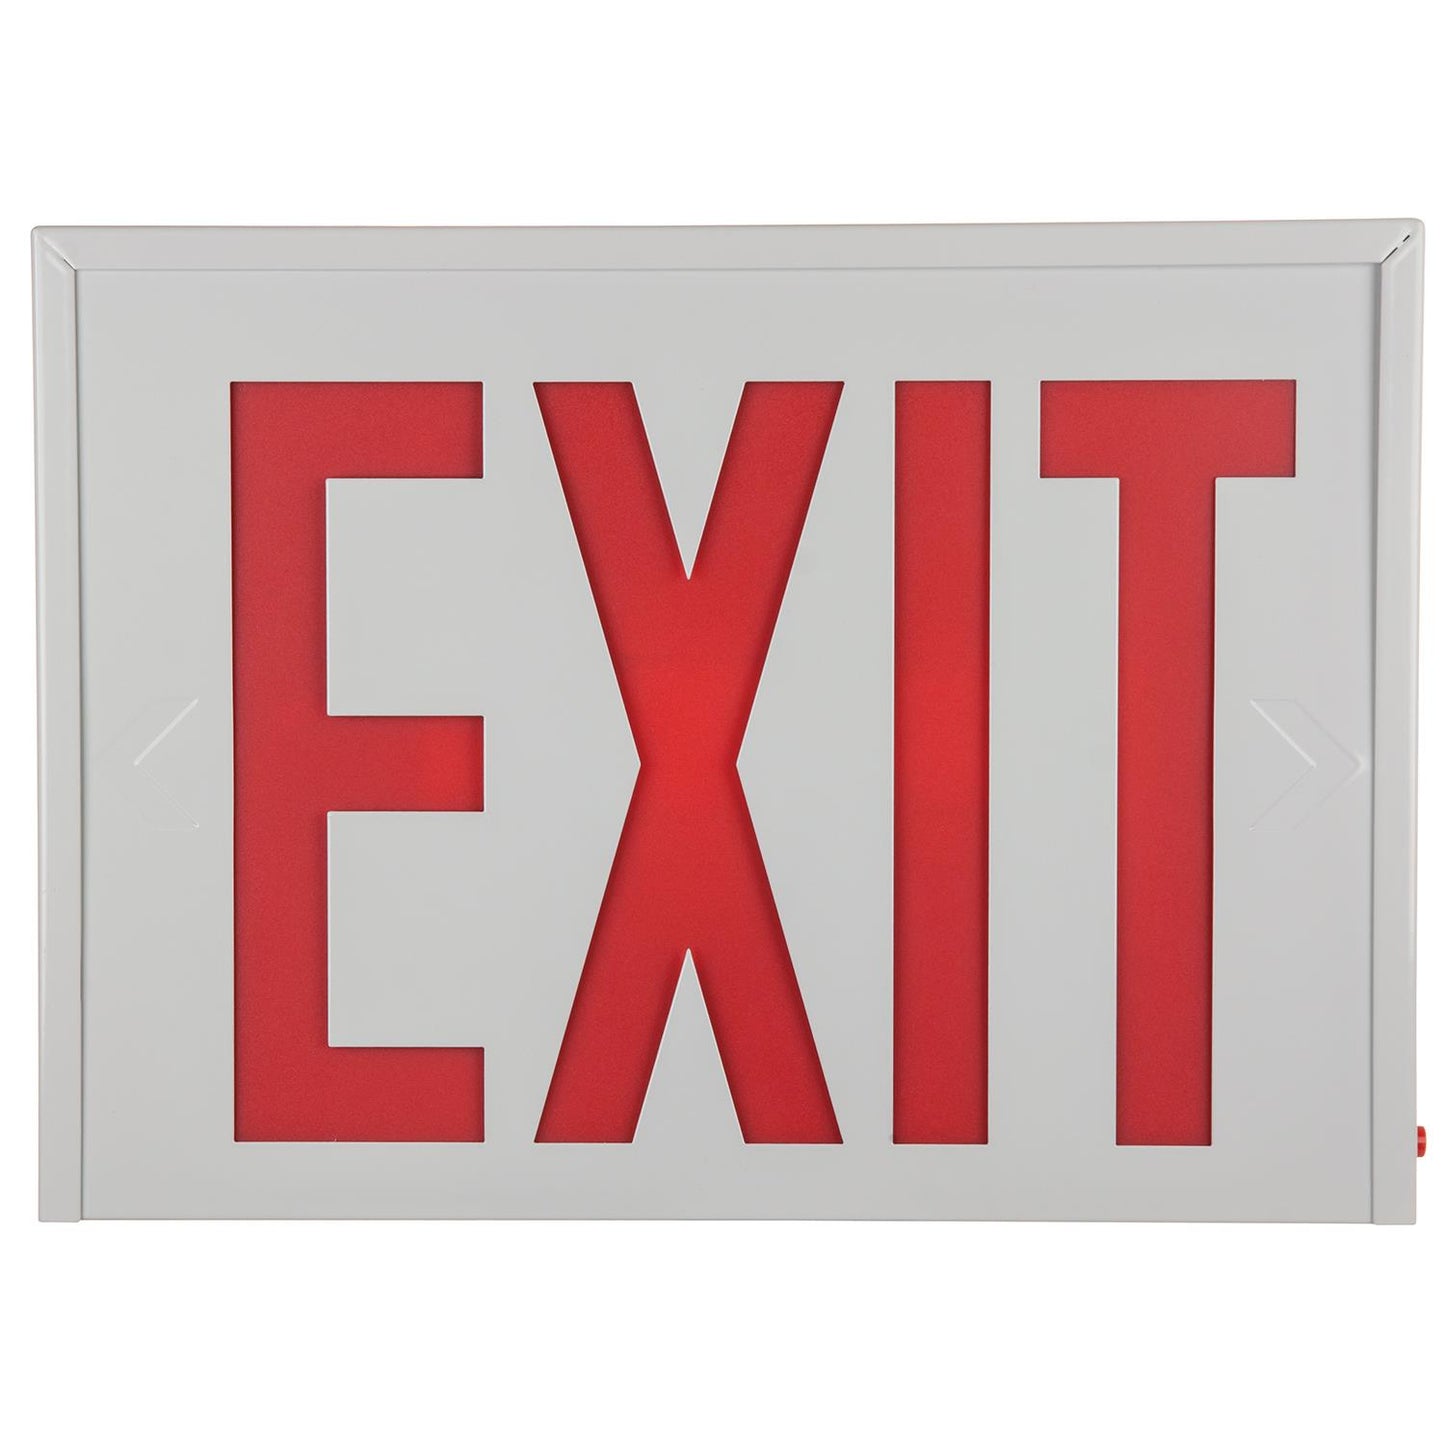 Sunlite Surface Mount Exit Light, White Housing, Single or Double Faced White Plate, Red Letters, NYC Approved, Emergency Backup Battery